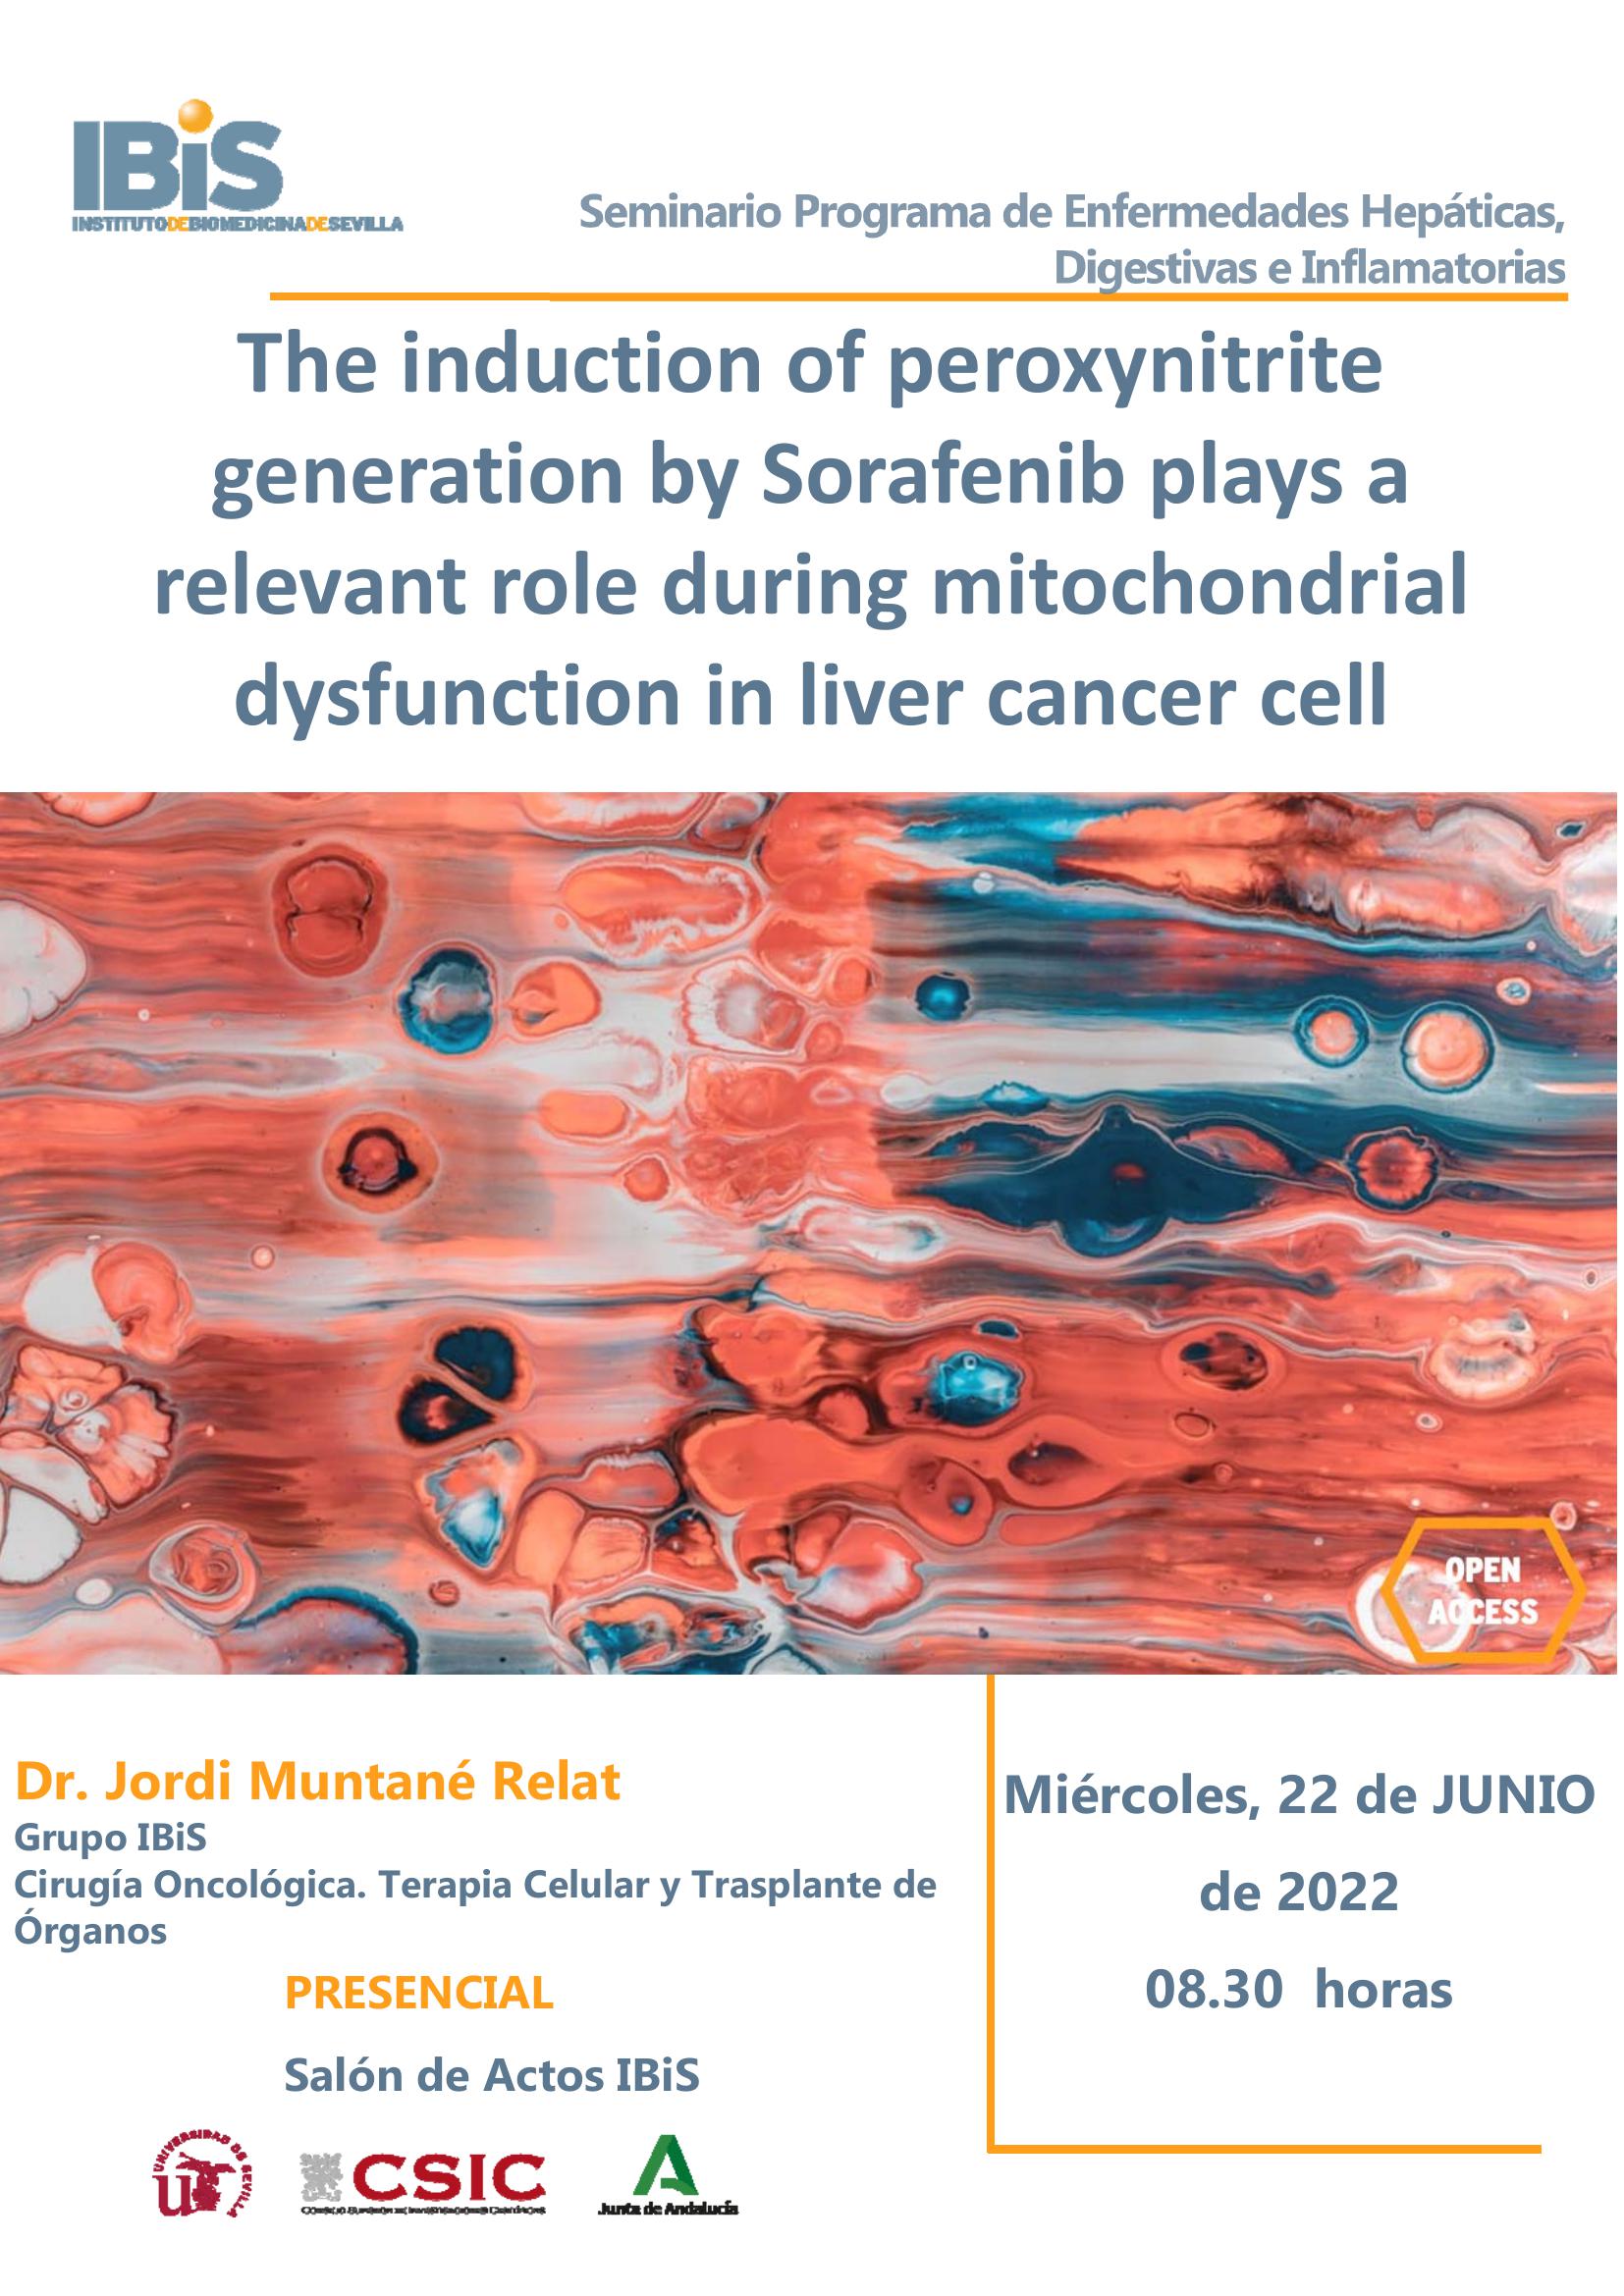 Poster: The induction of peroxynitrite generation by Sorafenib plays a relevant role during mitochondrial dysfunction in liver cancer cell